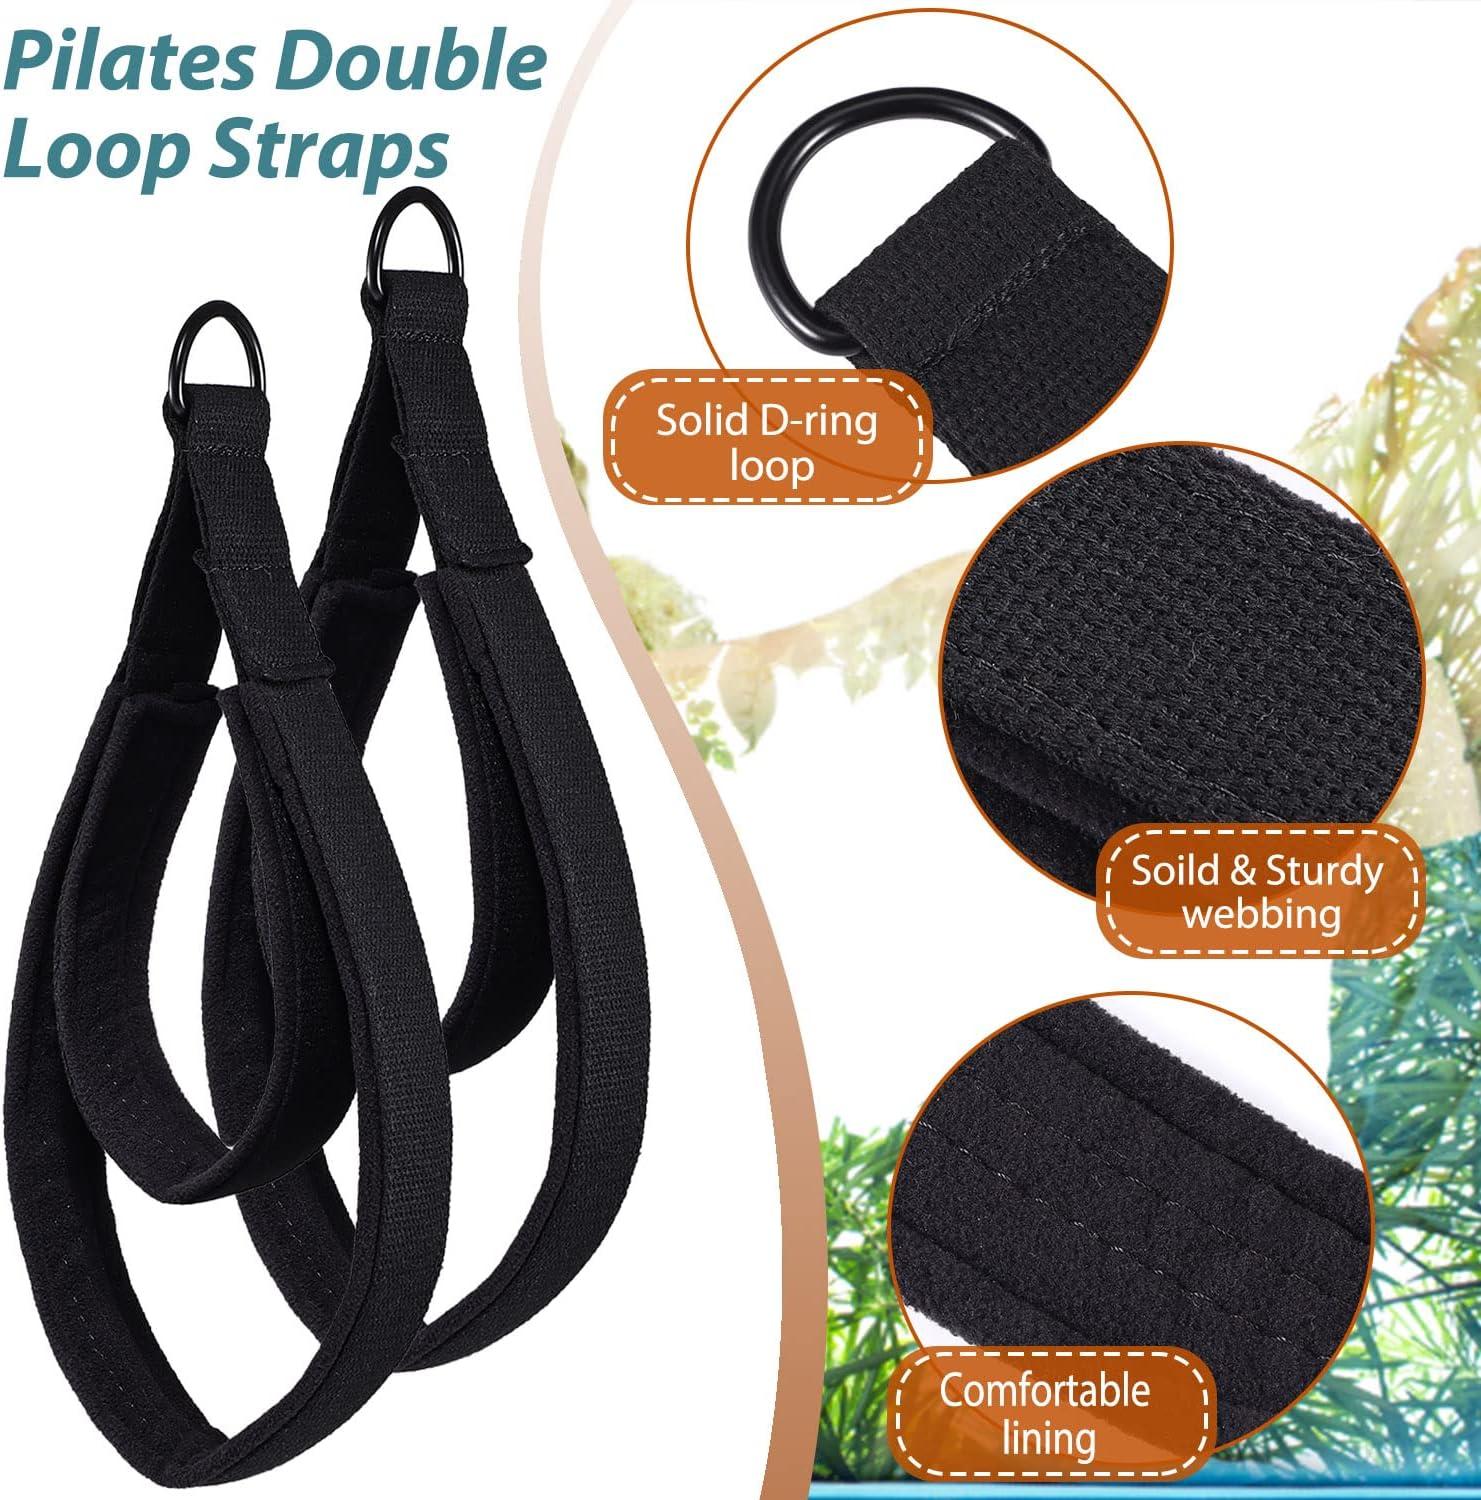 2 Pcs Pilates Double Loop Straps for Reformer Pilates Straps Pilates  Equipment Yoga Straps Exercise Straps for Home Gym Workout